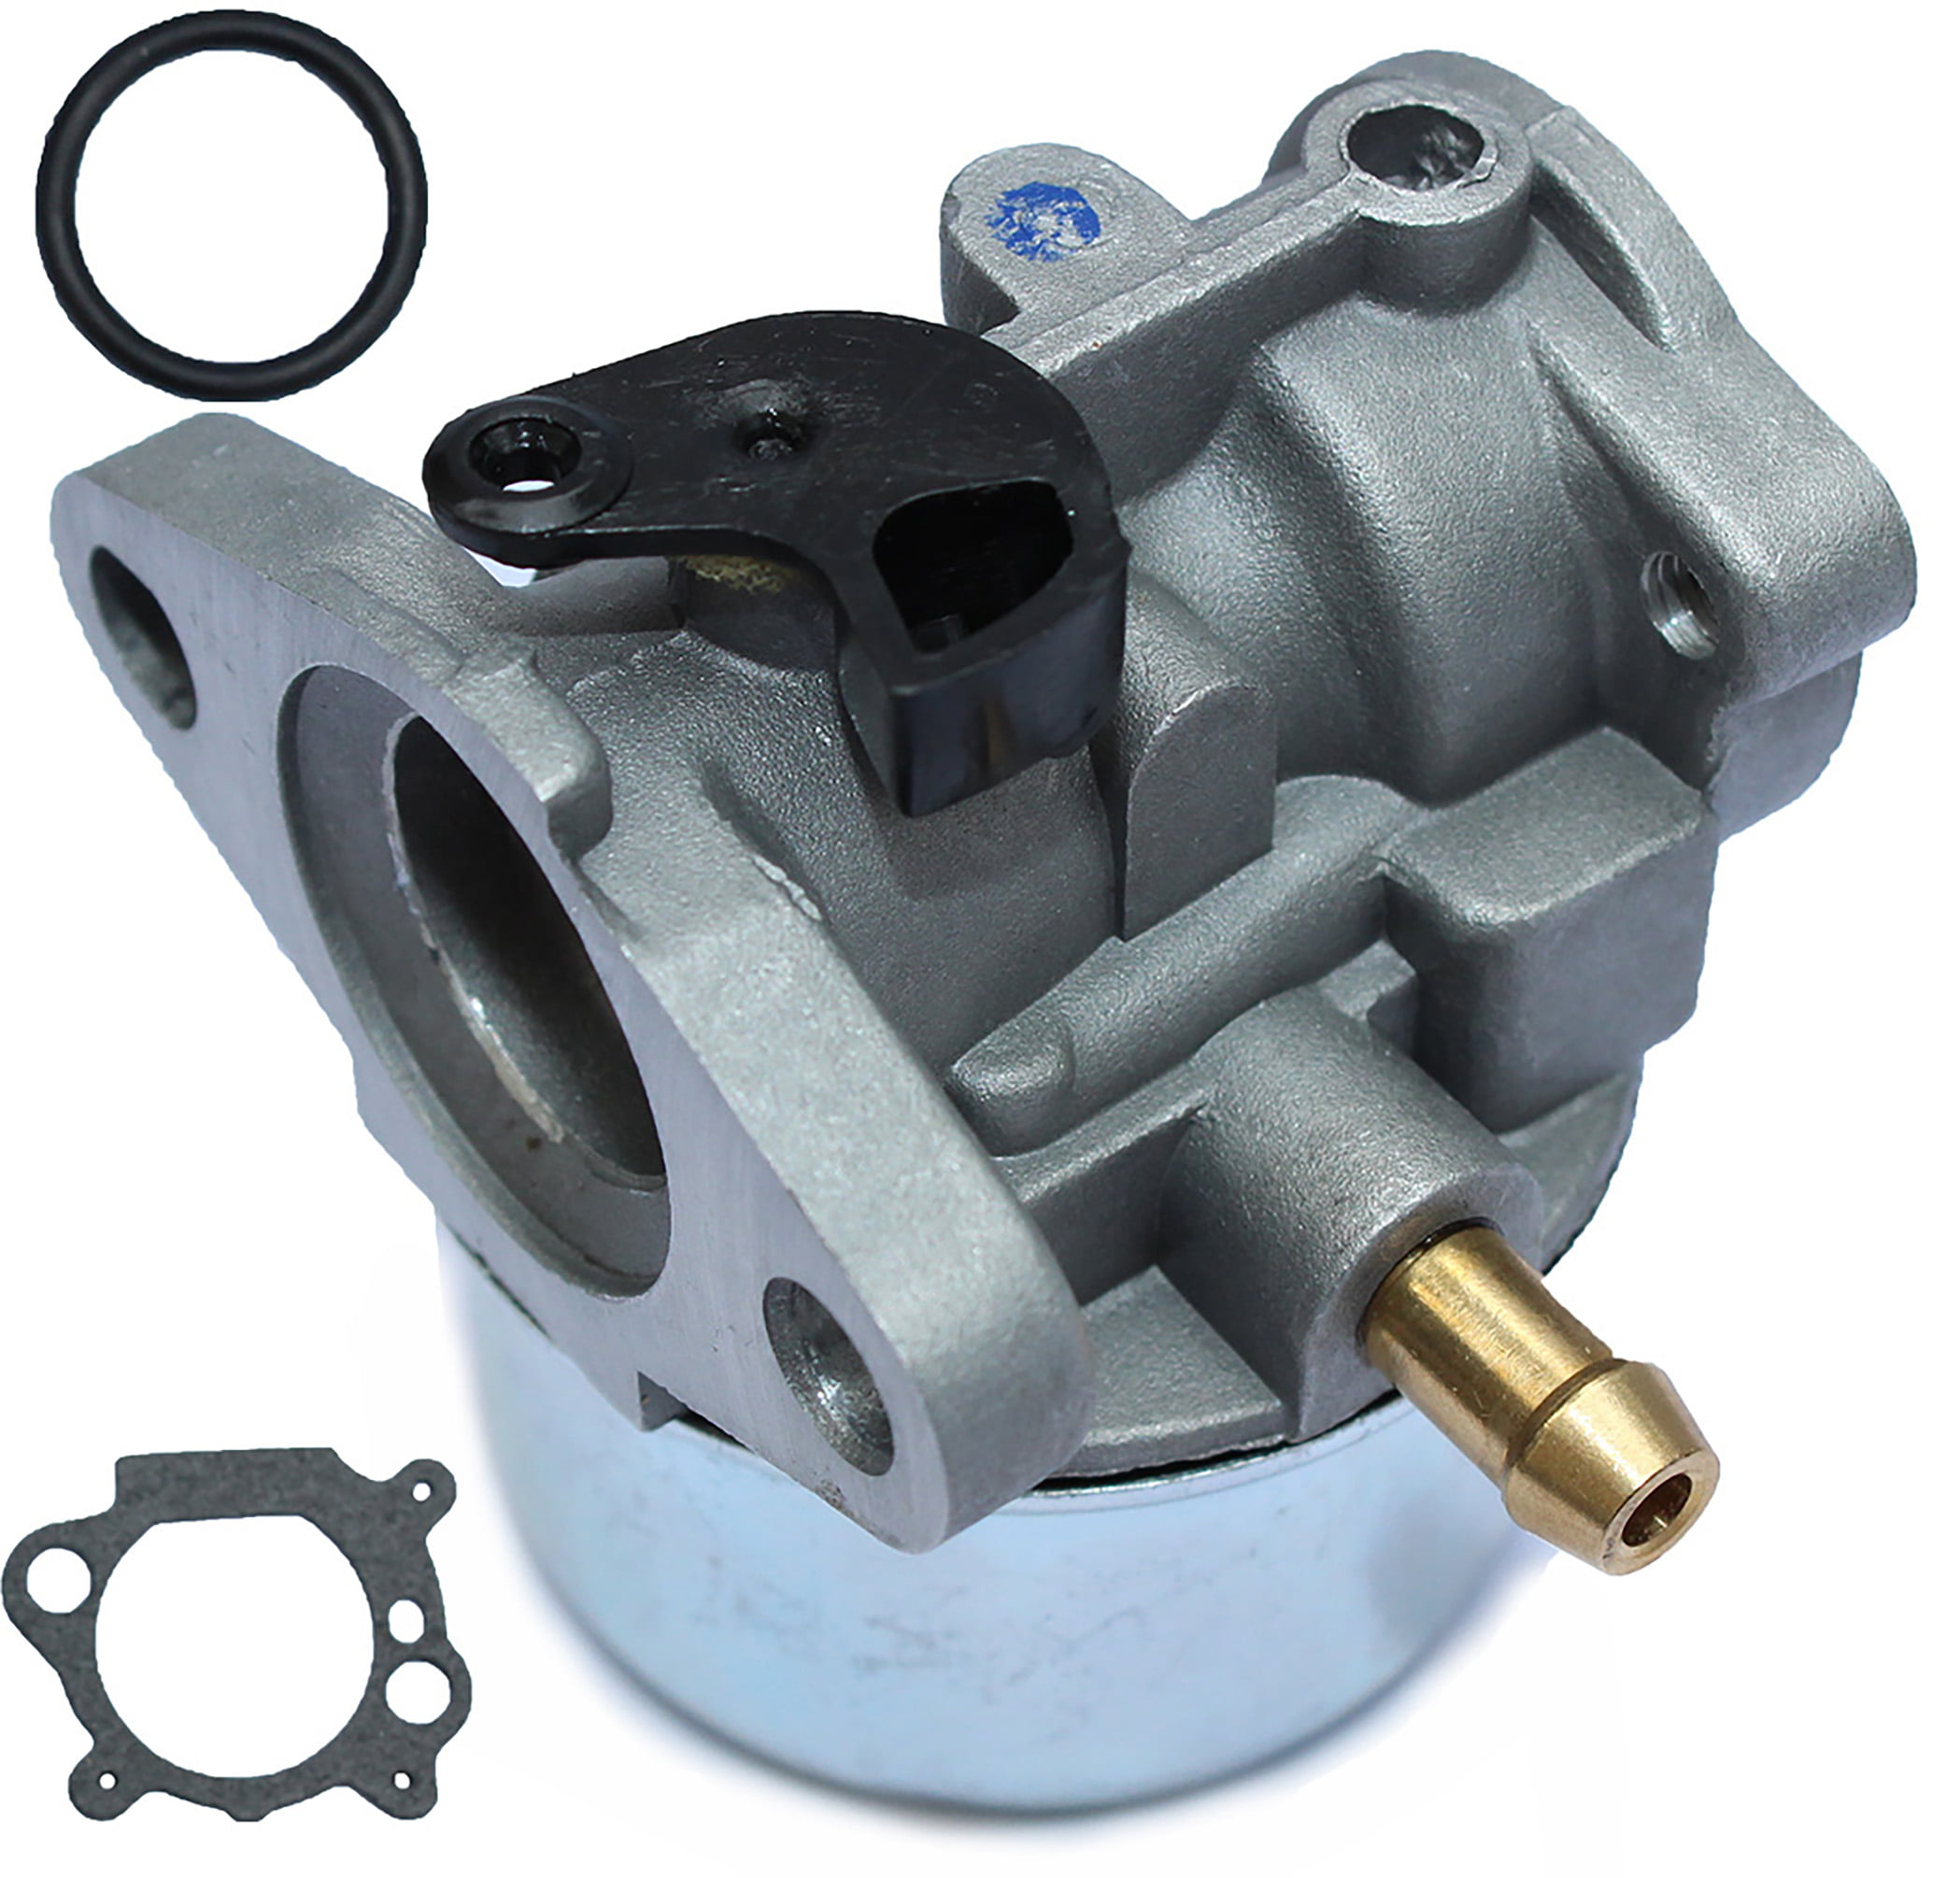 4-7 Engines with No-Choke RETYLY Carburetor Fits 498170 497586 497314 698444 498254 497347 Models with Gasket and O-Ring 799868 